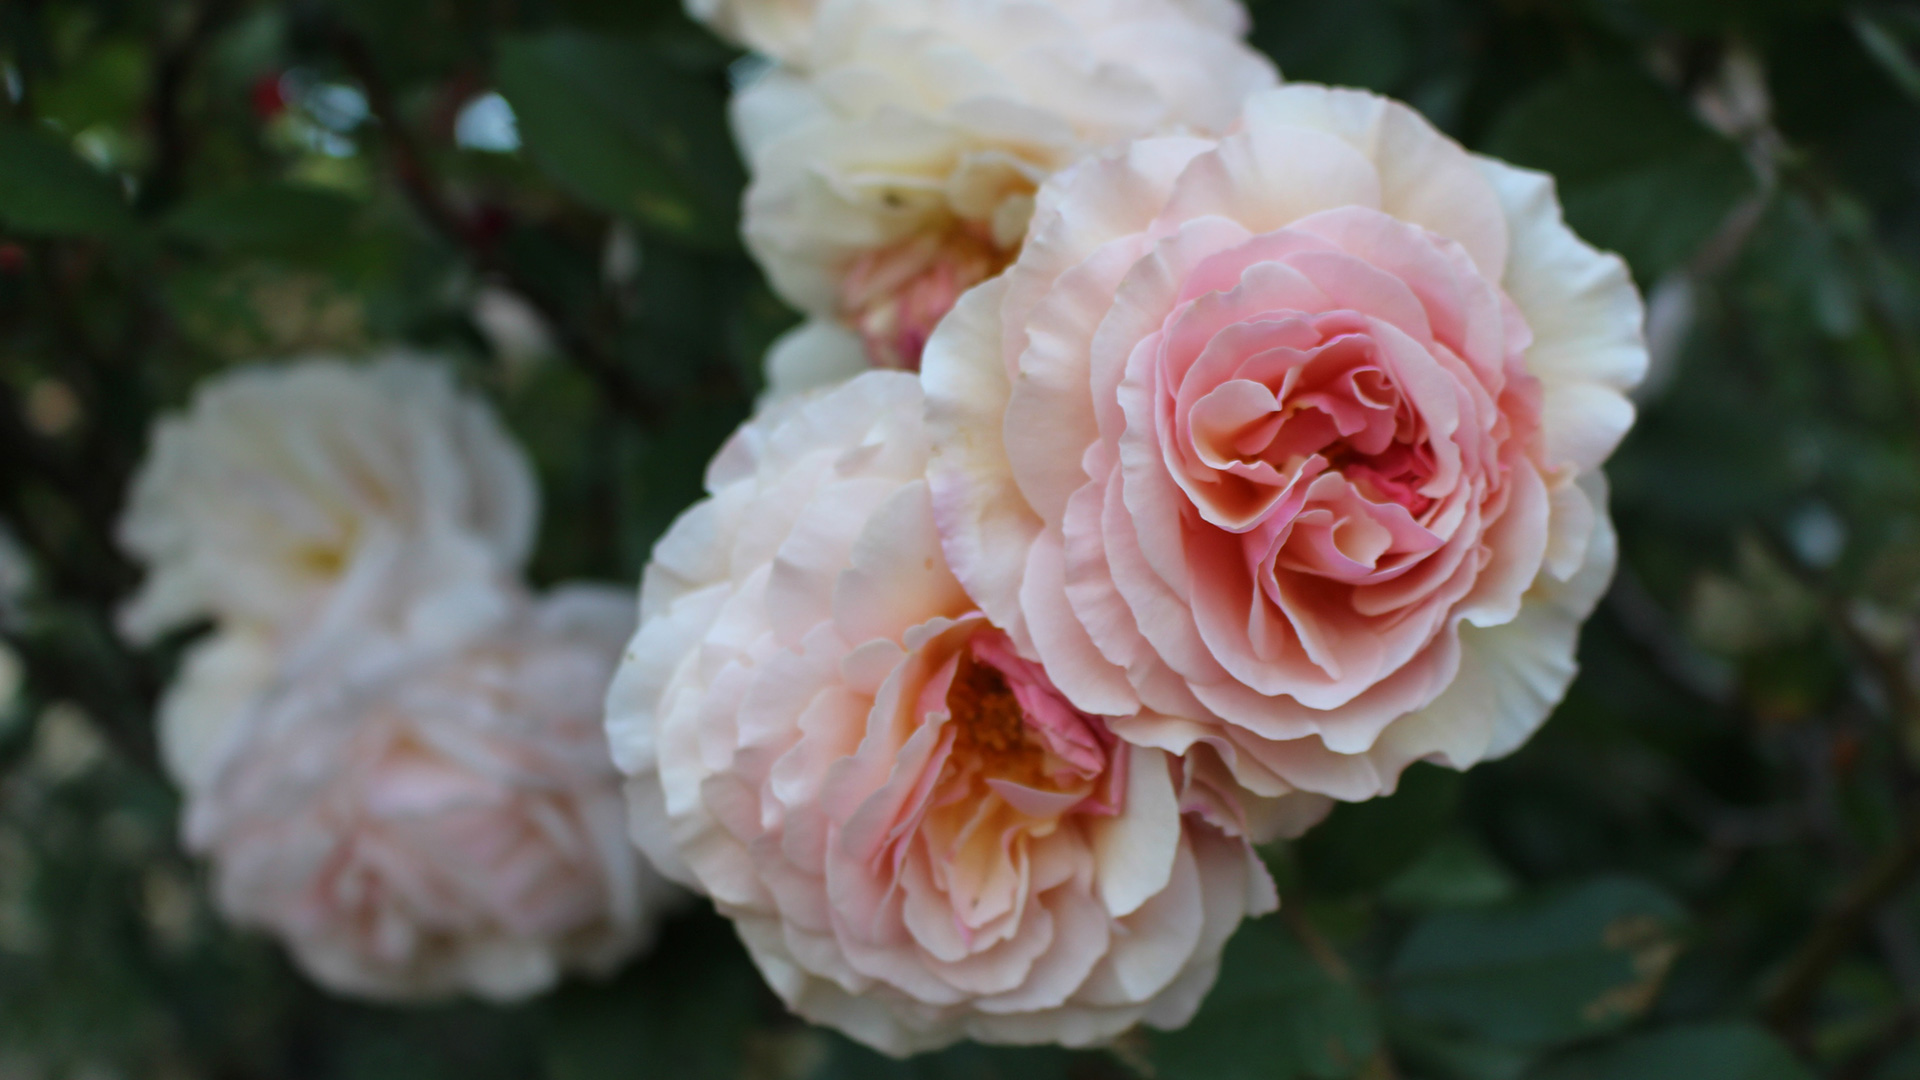 pink-and-white-rose-flowers-during-daytime